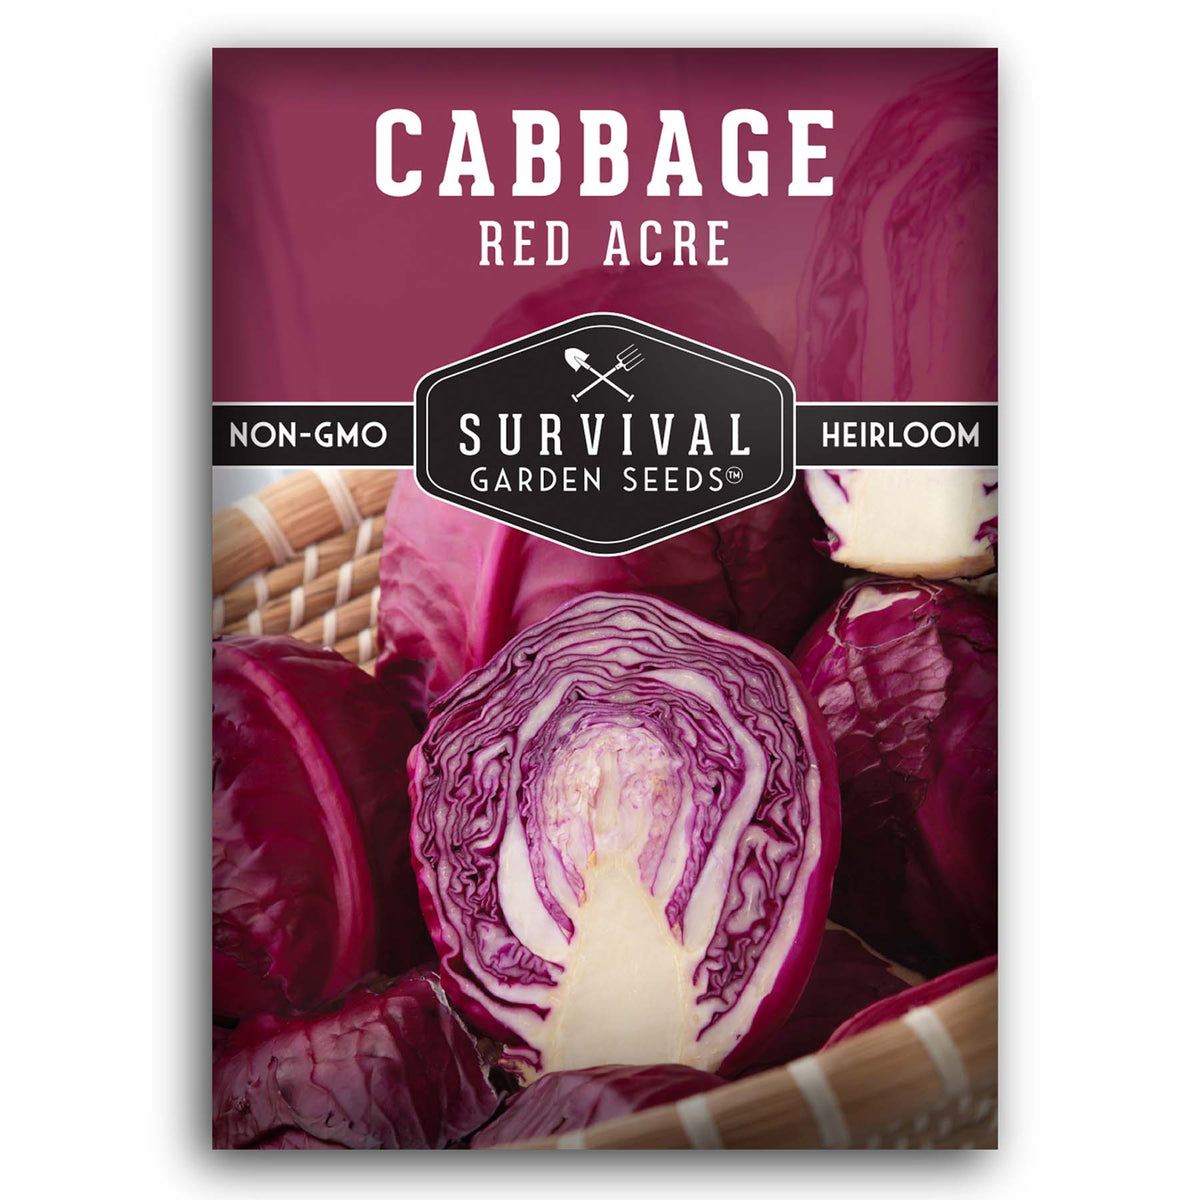 Red Acre Cabbage Seeds for planting